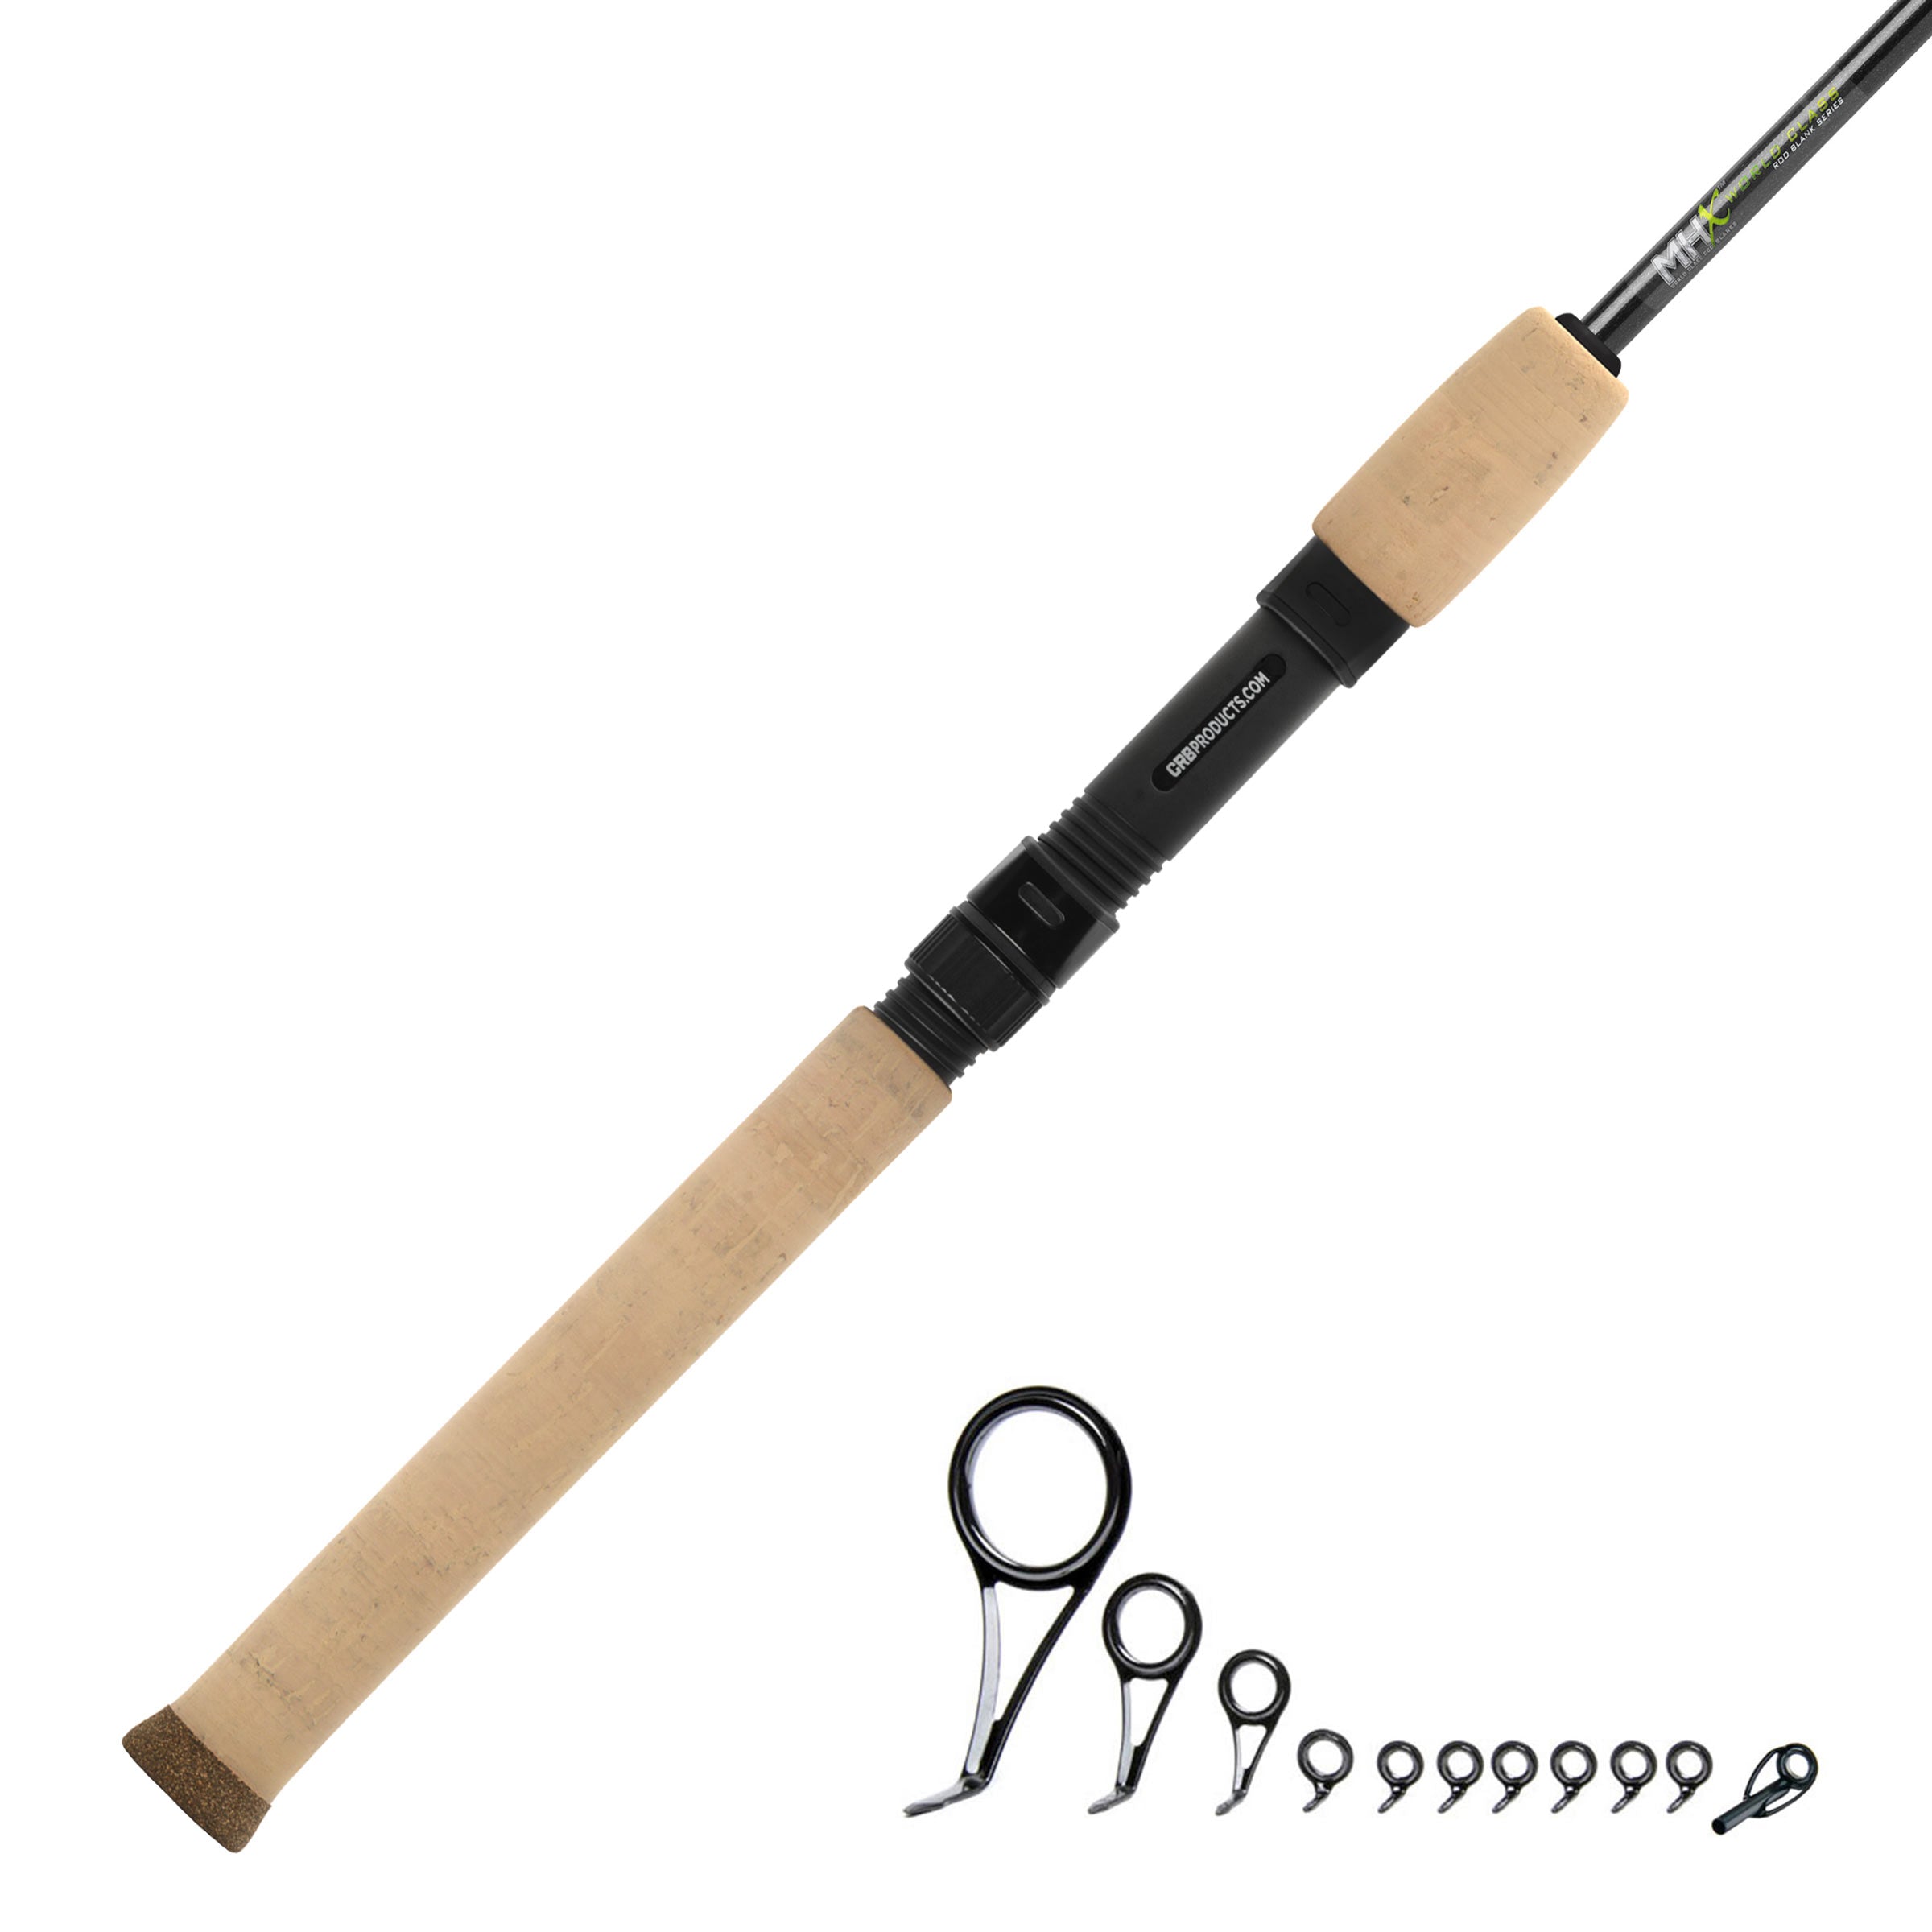 Star Rod, Sequence Spinning Rod, 1 Piece, 6-14lb, Split Grip Cork Grips  with Free S&H — CampSaver